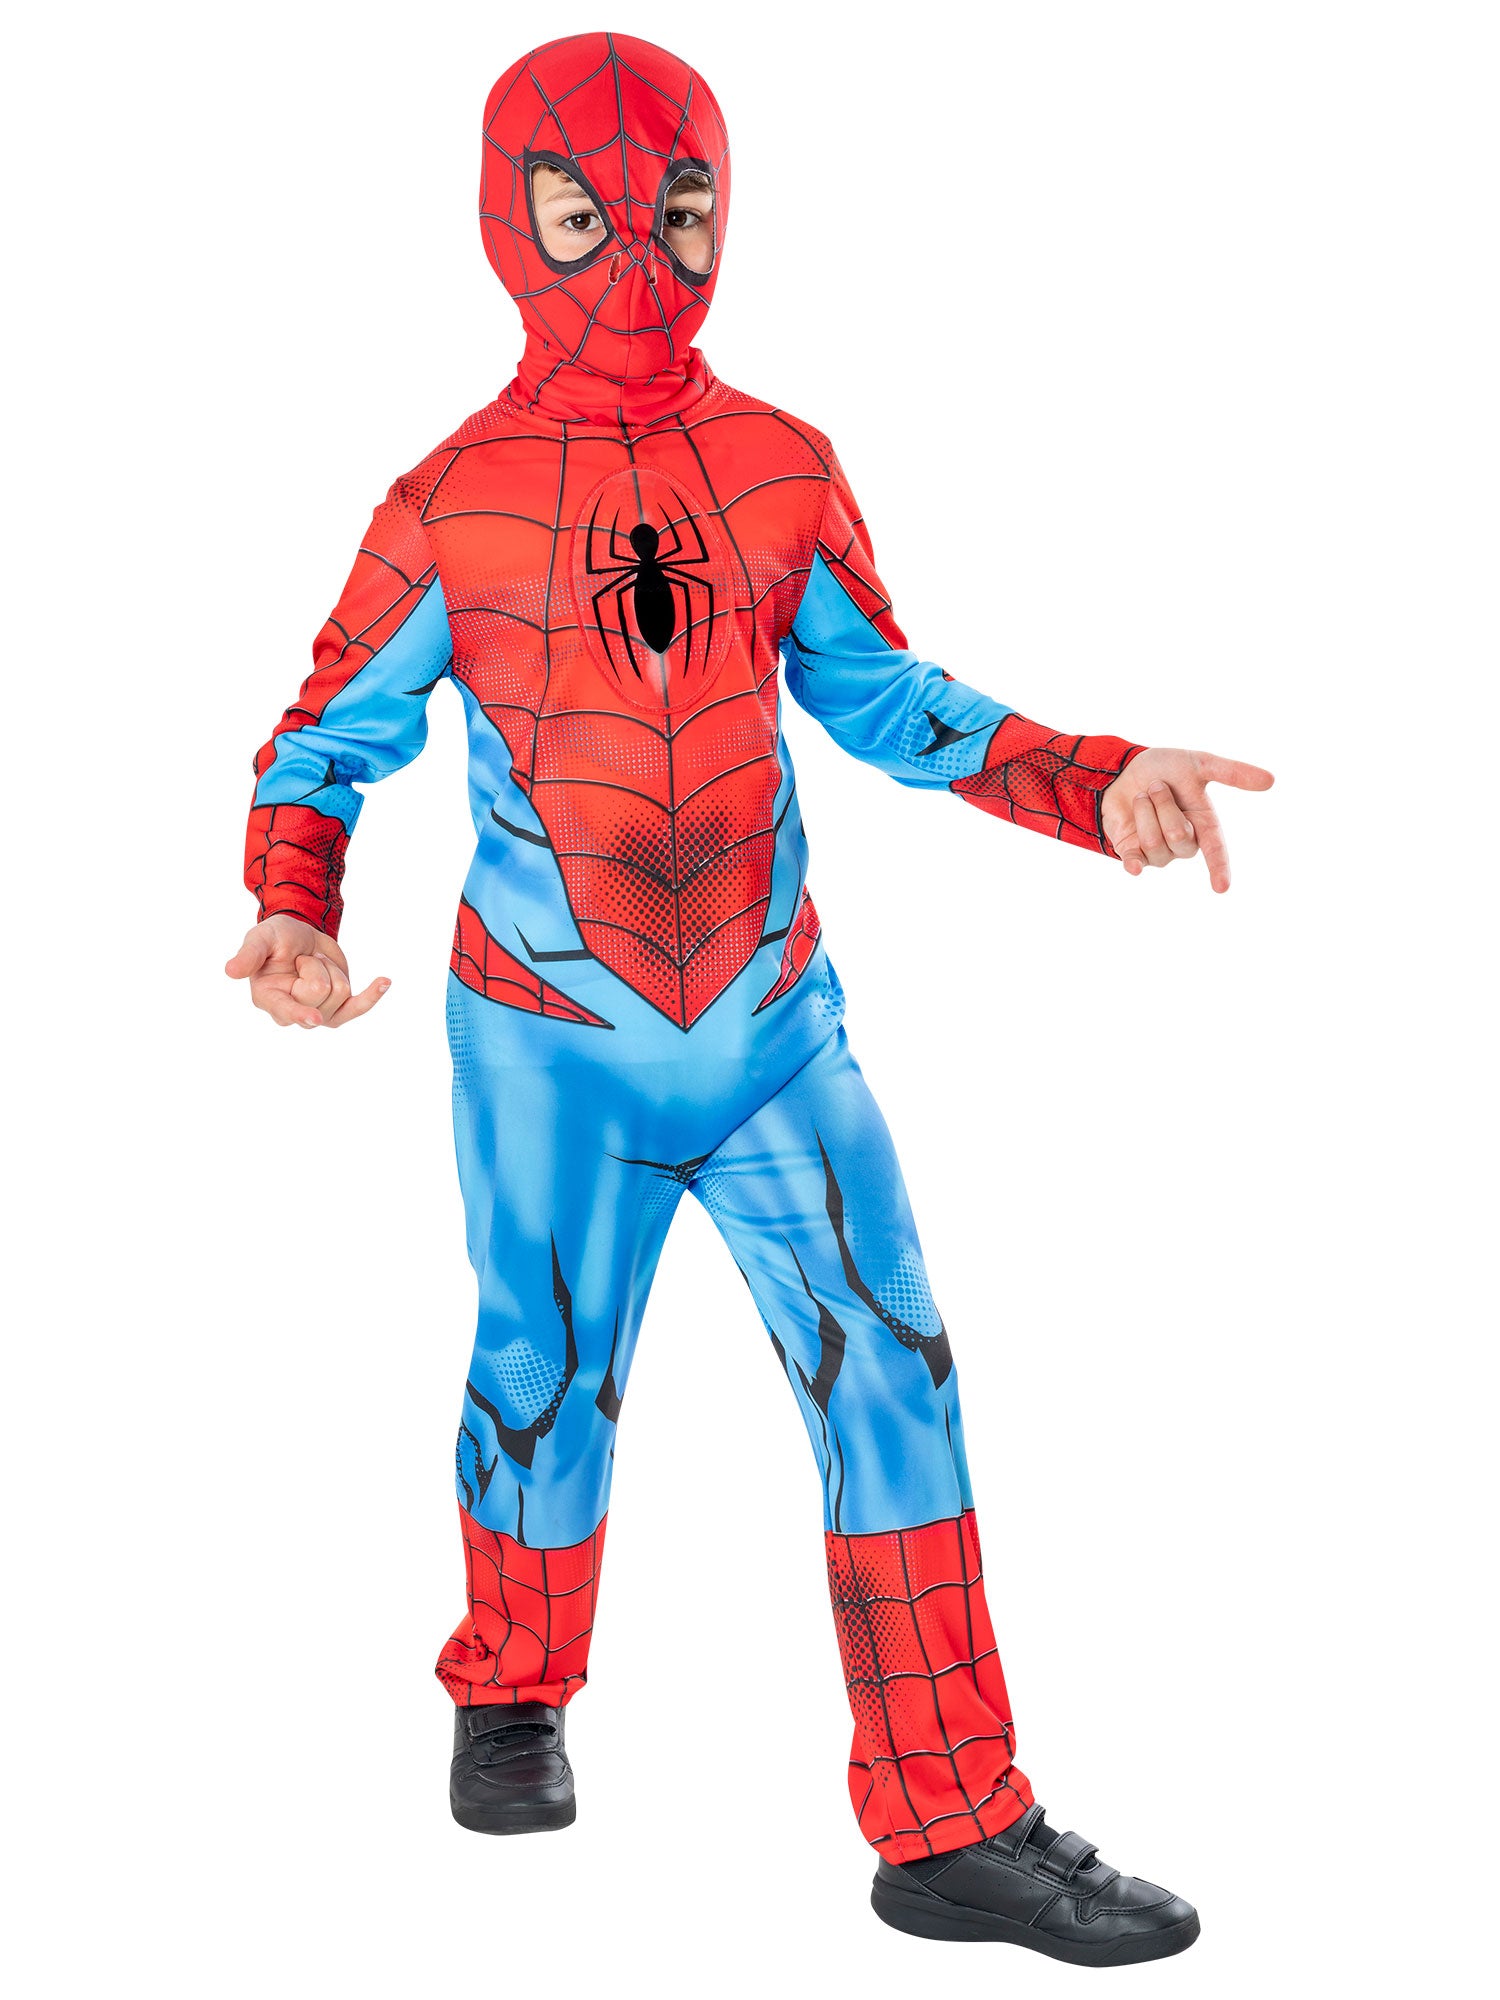 Spider-Man, Avengers, Red, Marvel, Kids Costumes, 7-8 years, Front